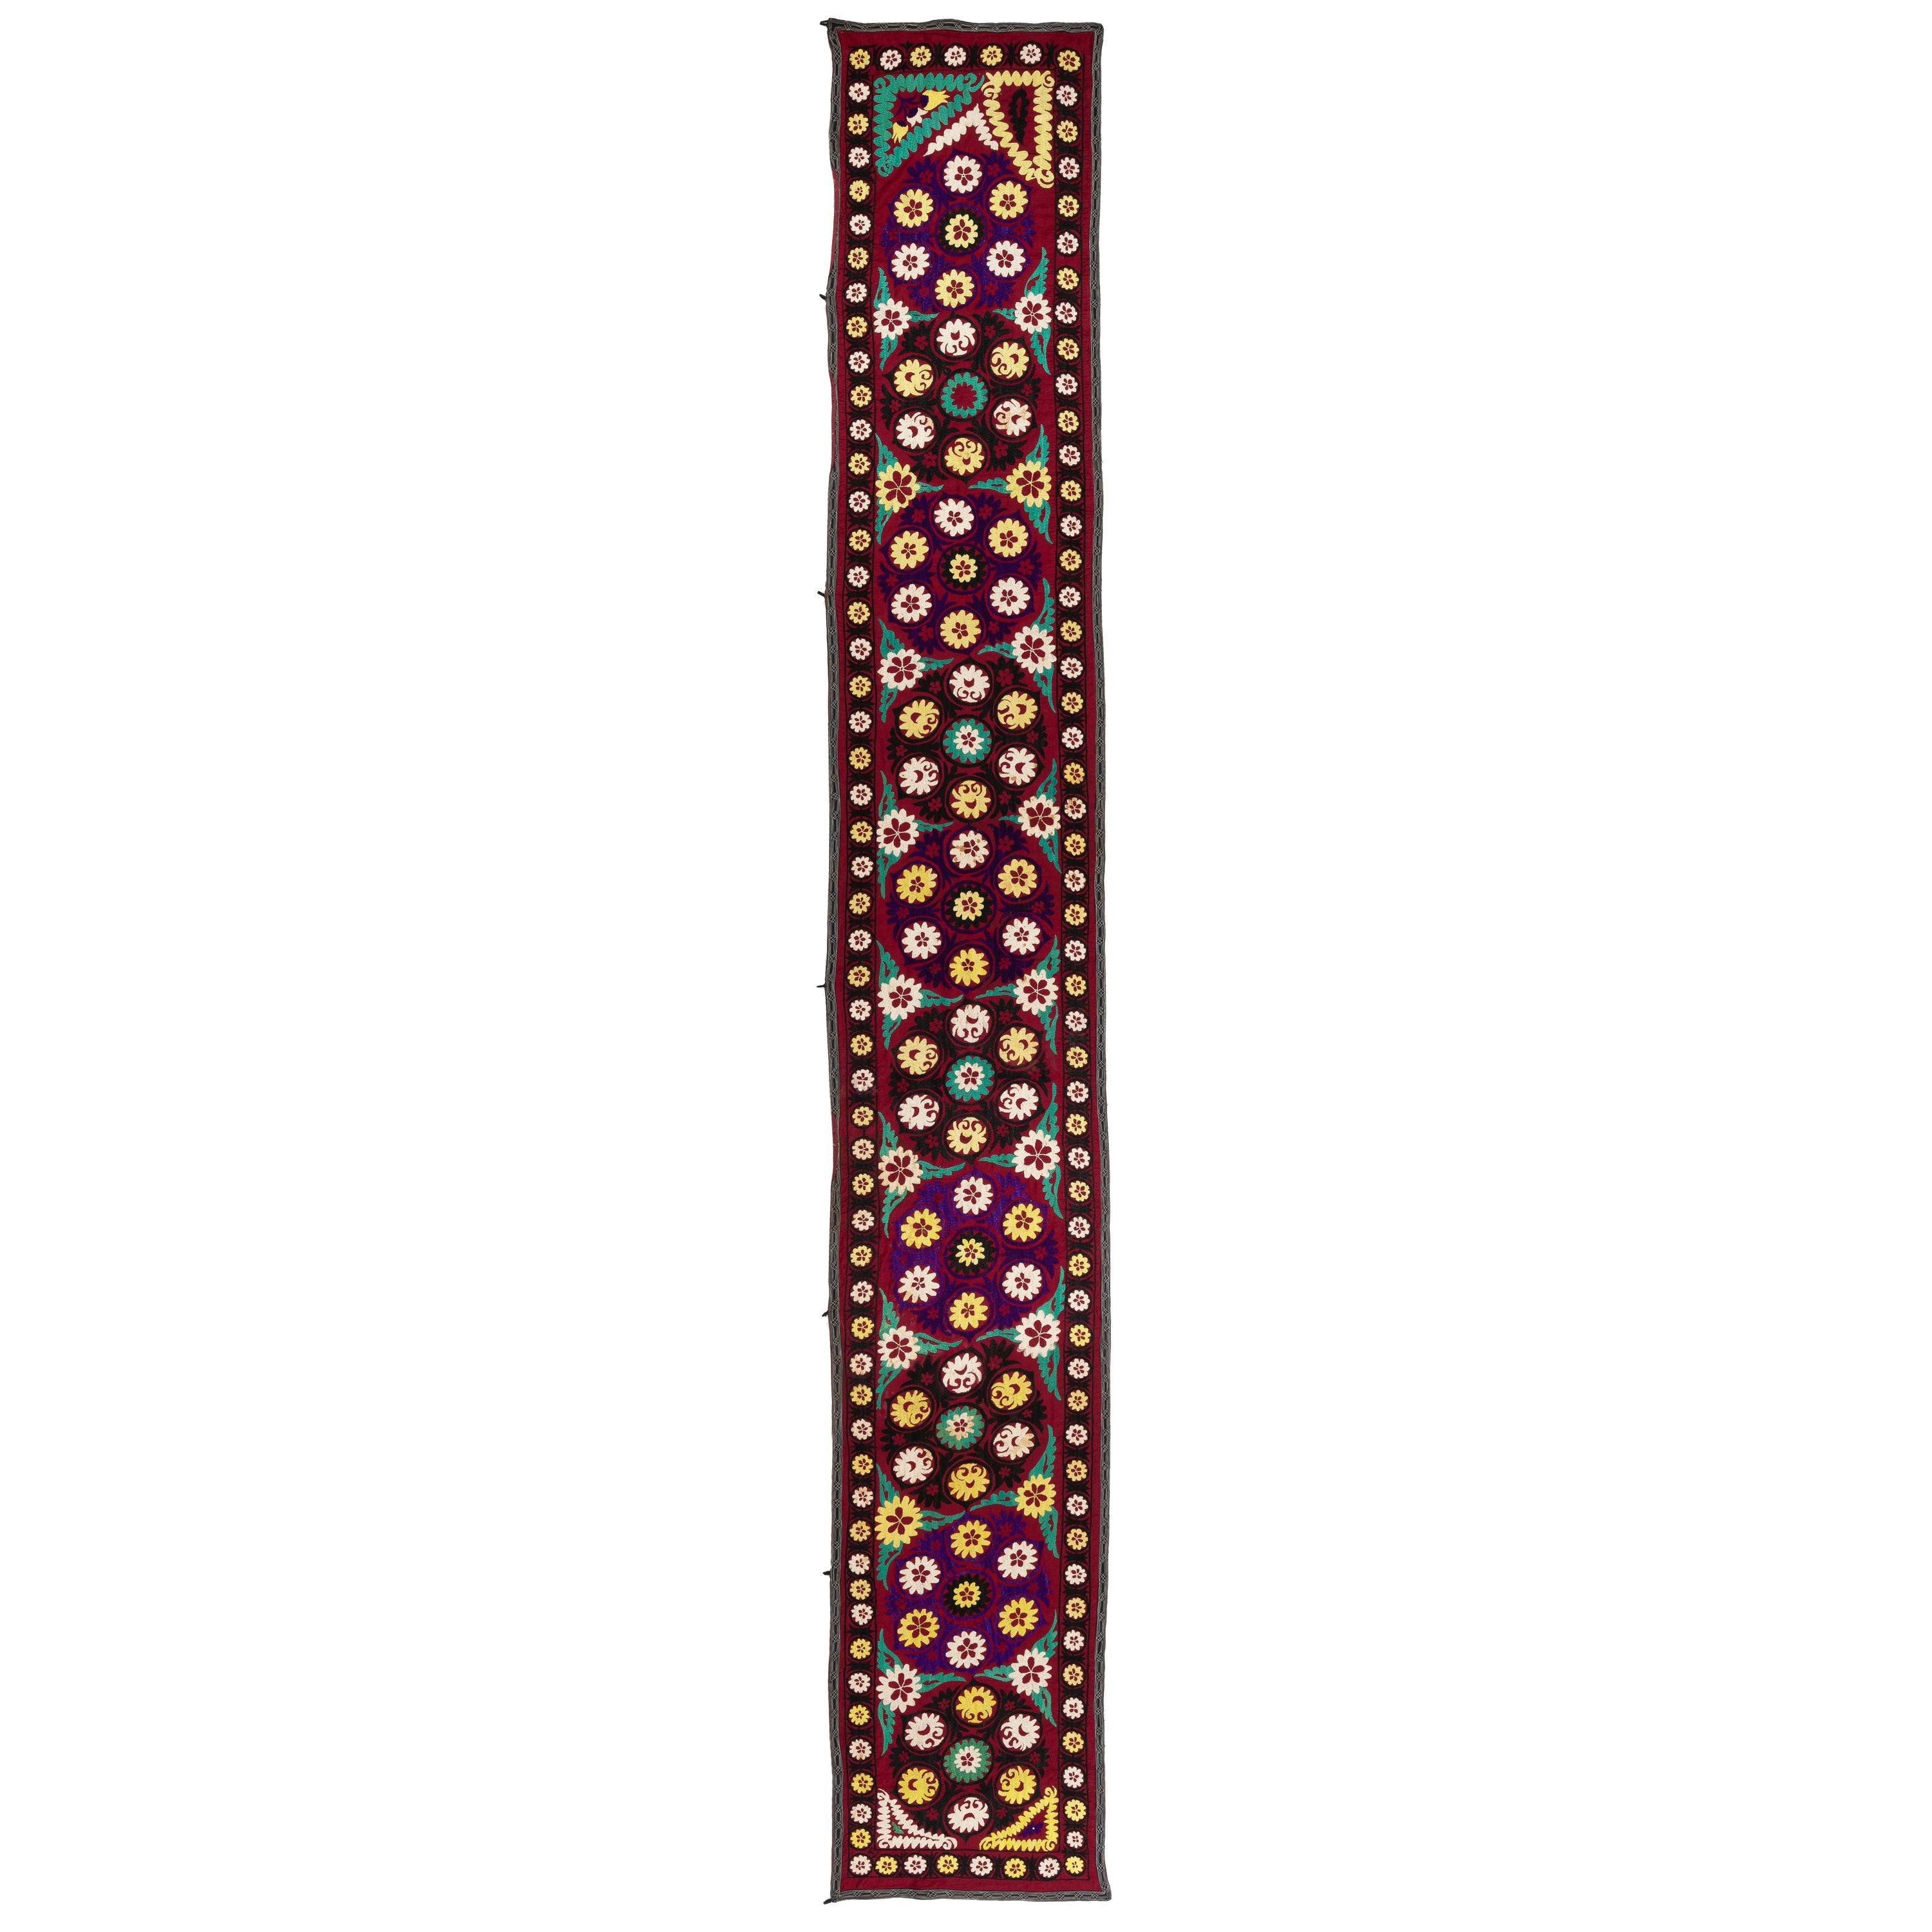 2x14 Ft Silk Embroidery Table Runner, Vintage Floral Pattern Suzani Wall Hanging For Sale